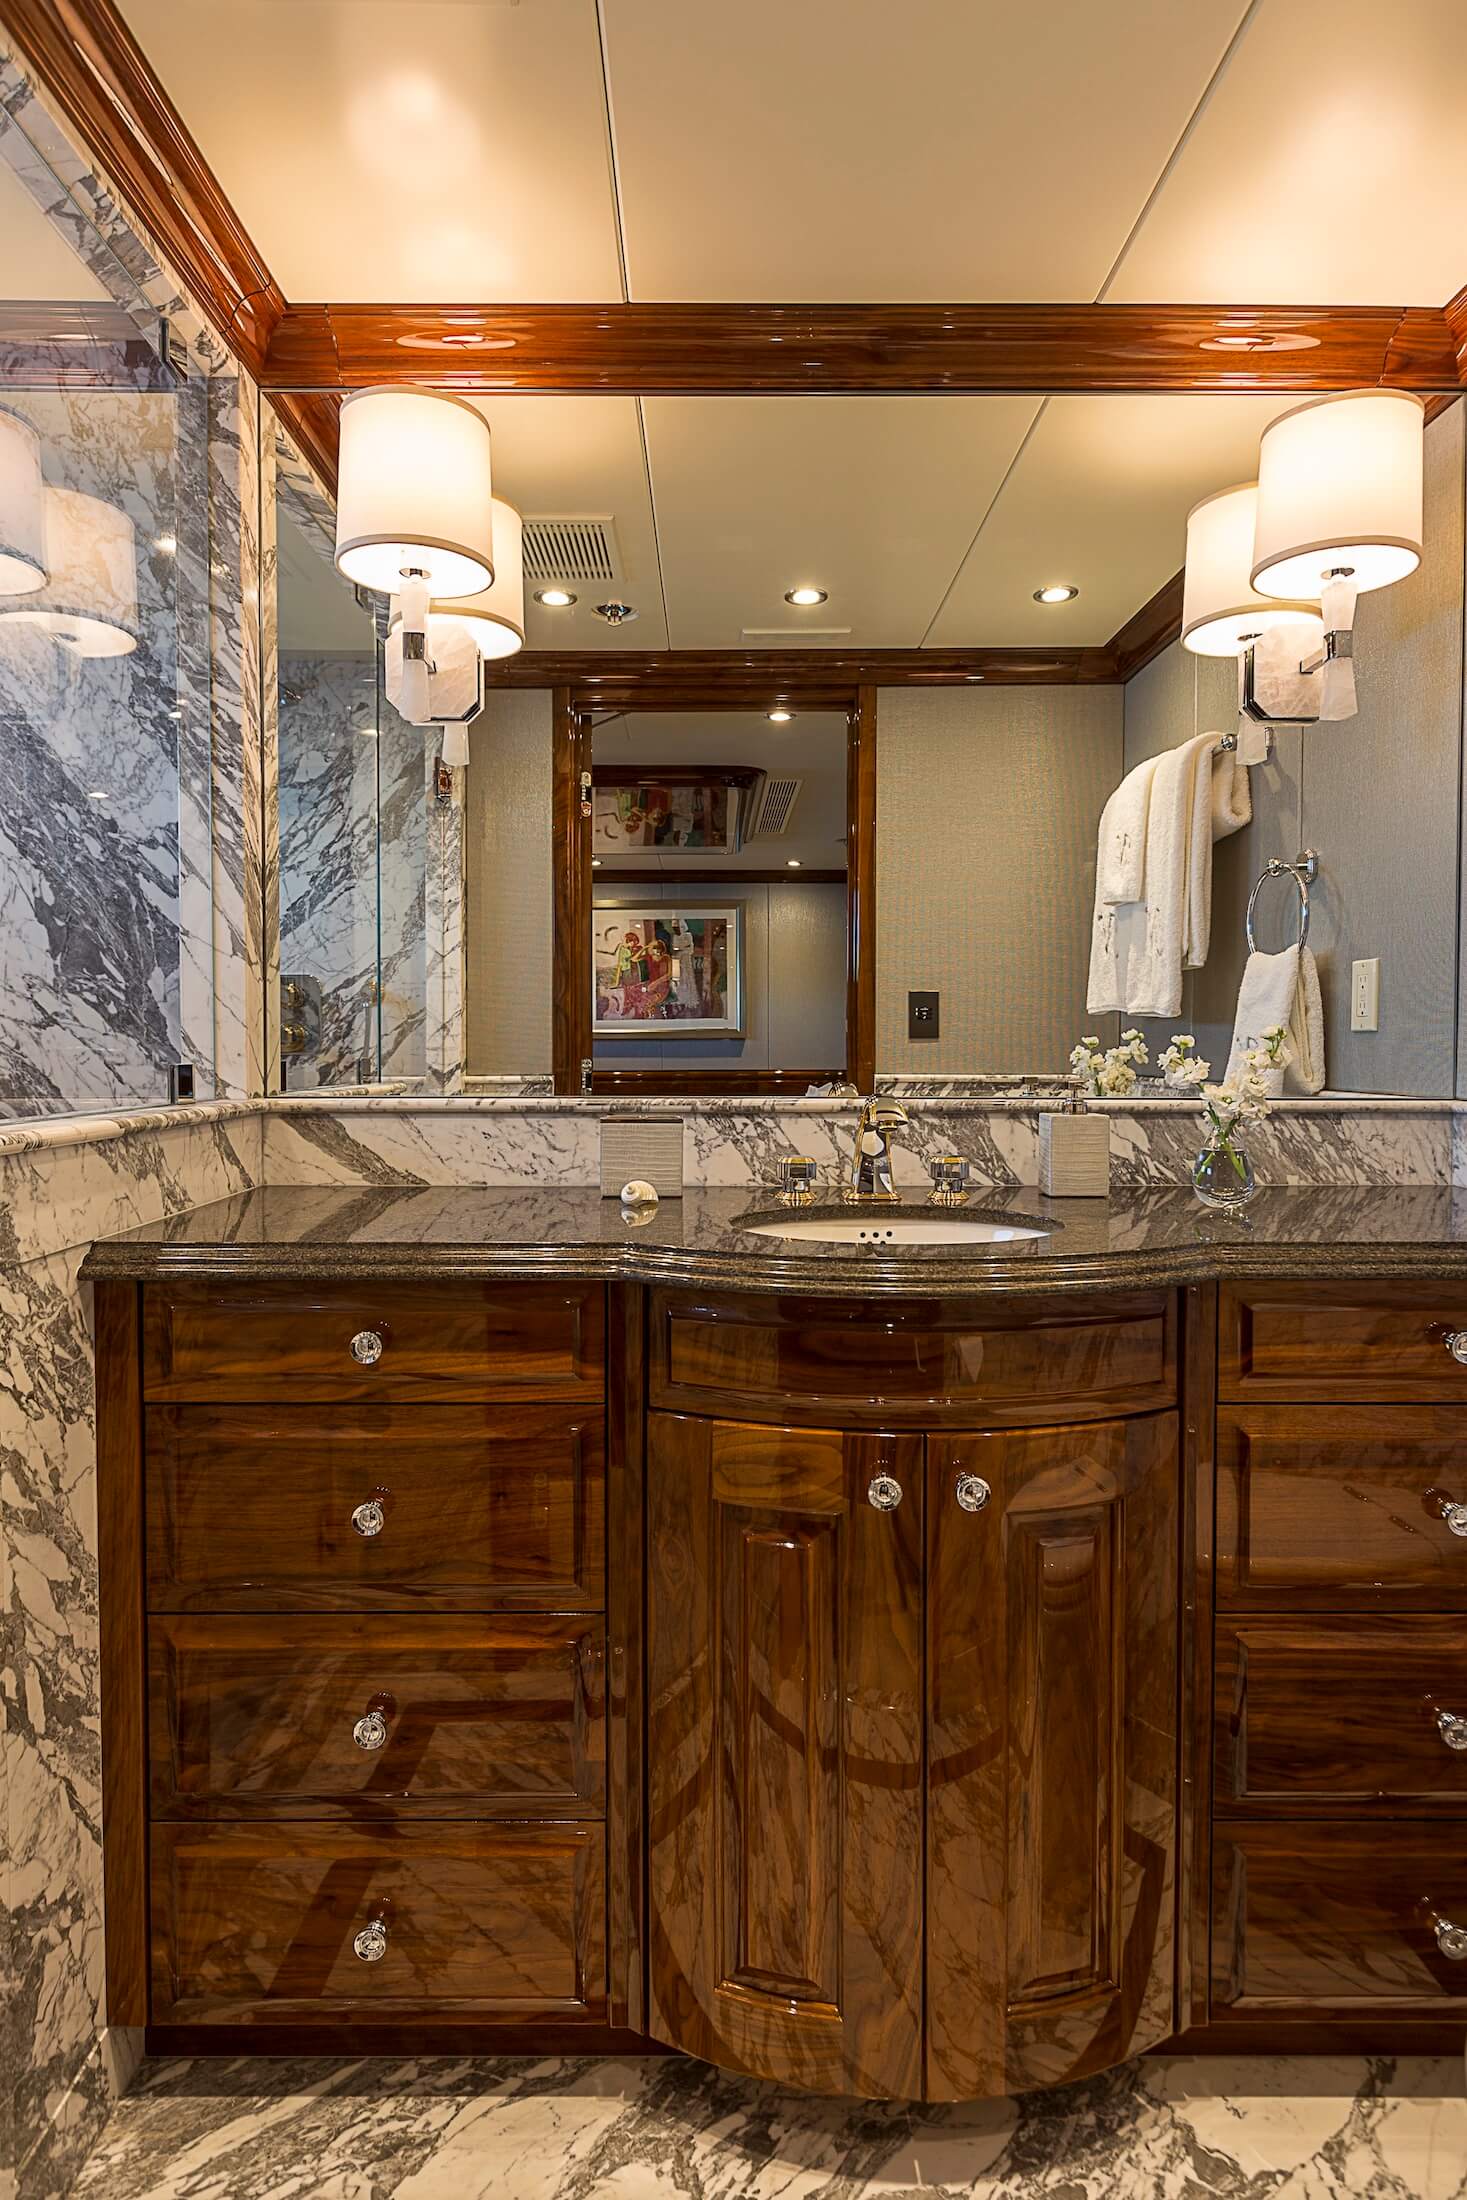 D'Natalin Luxury Yacht bathroom counter with sink